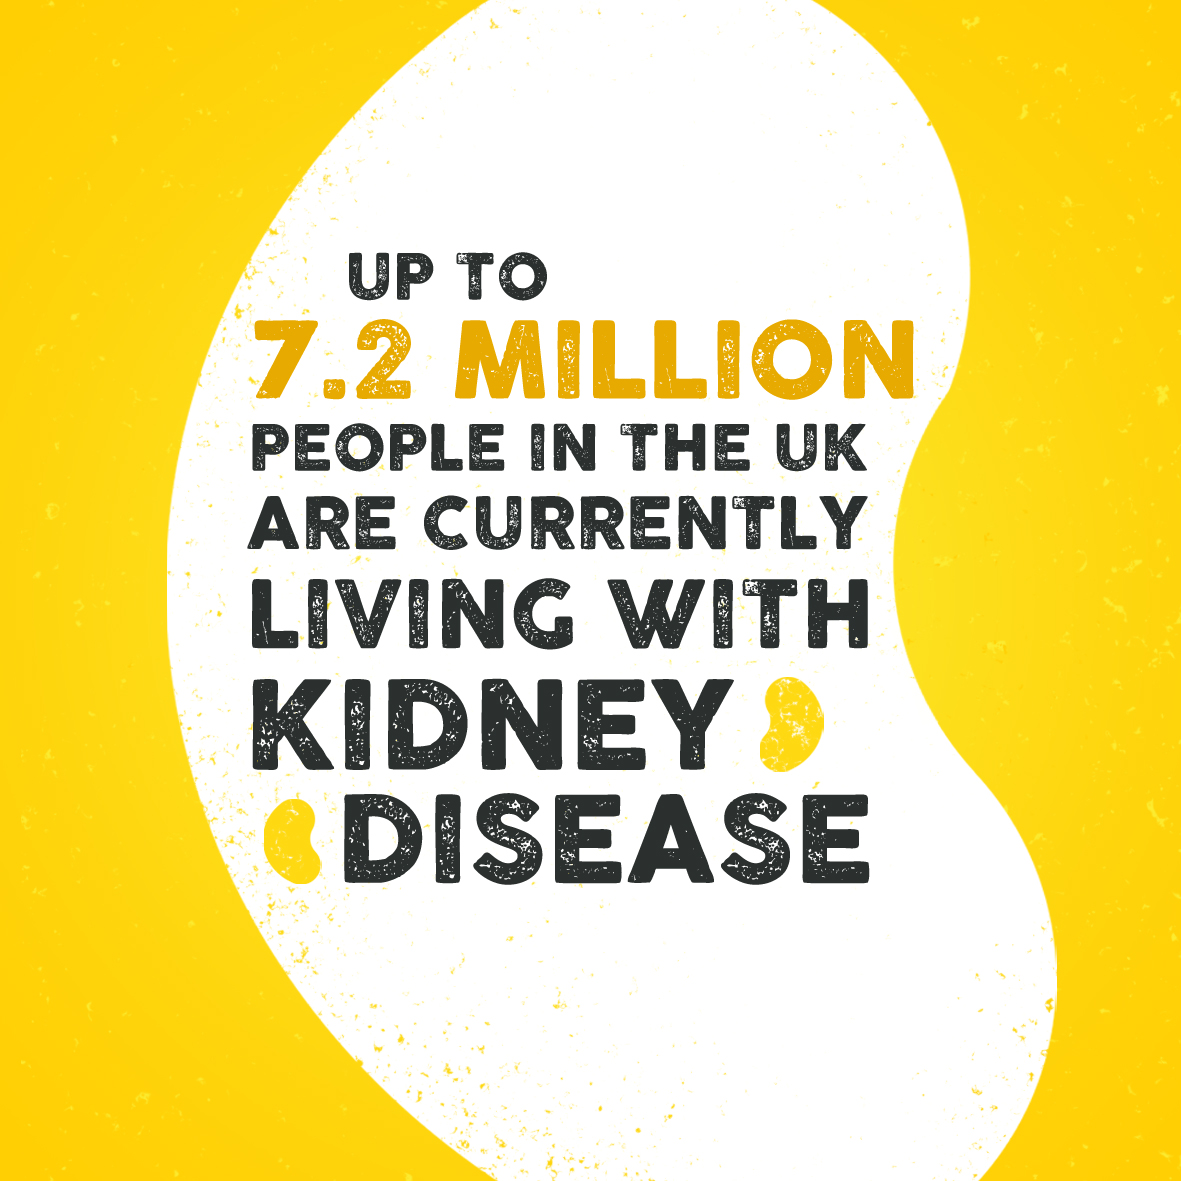 Did you know in the UK, 7.2 million people have kidney disease & yet 1 million don't even know it!😯 Kidney disease is common, but awareness remains low. Help us make a difference by simply sharing this post. Find out more: worldkidneyday.co.uk #WorldKidneyDay